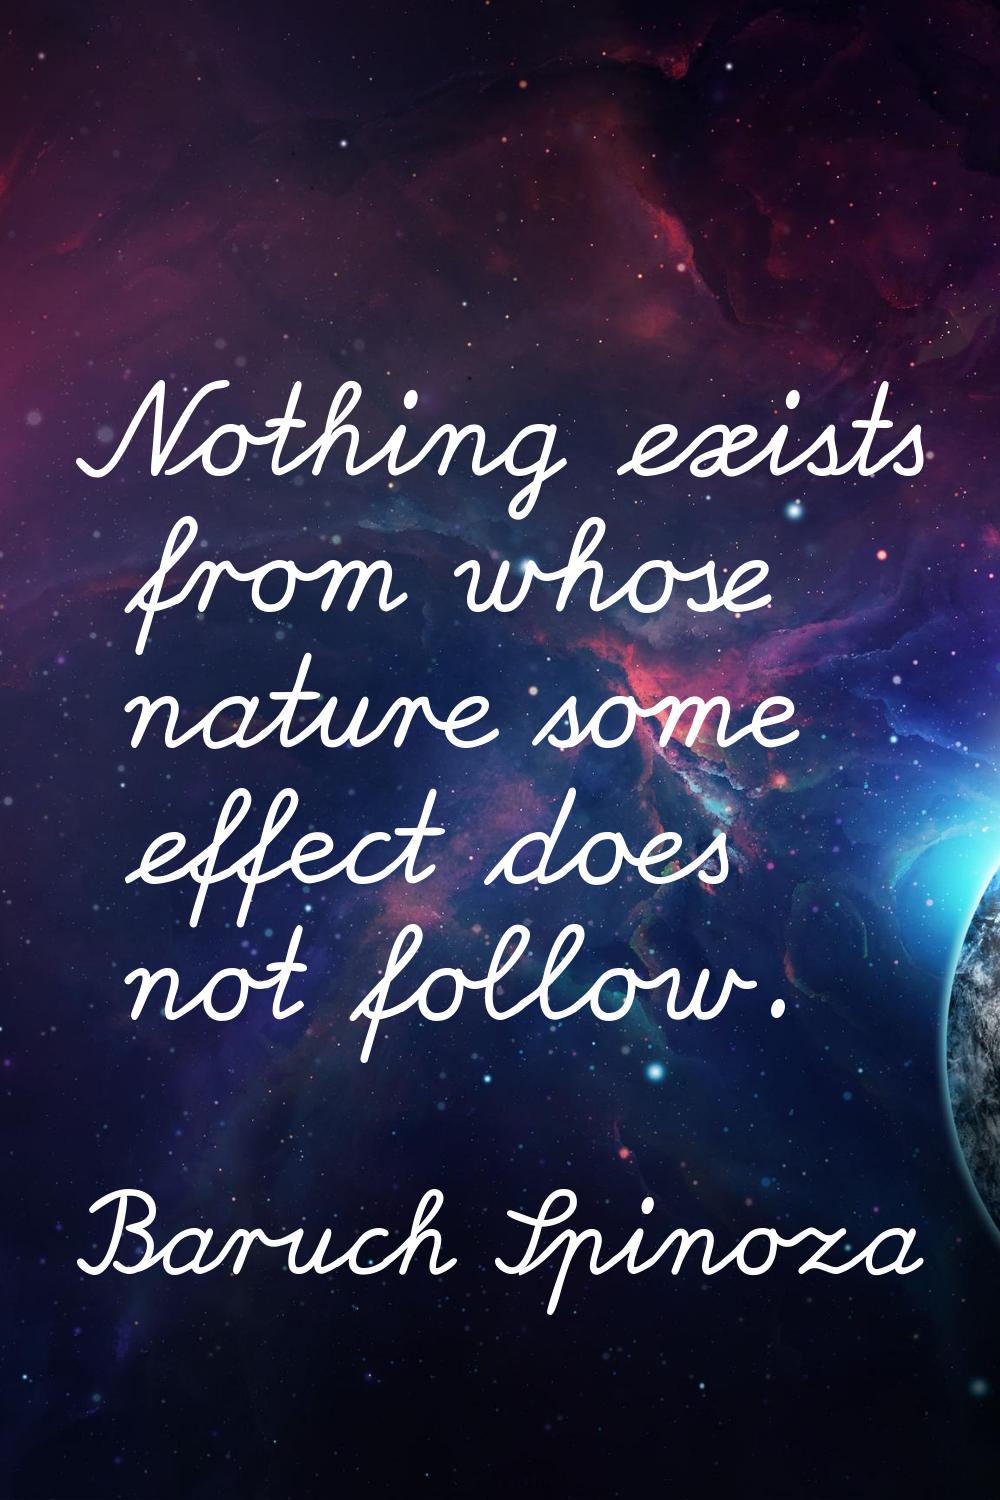 Nothing exists from whose nature some effect does not follow.